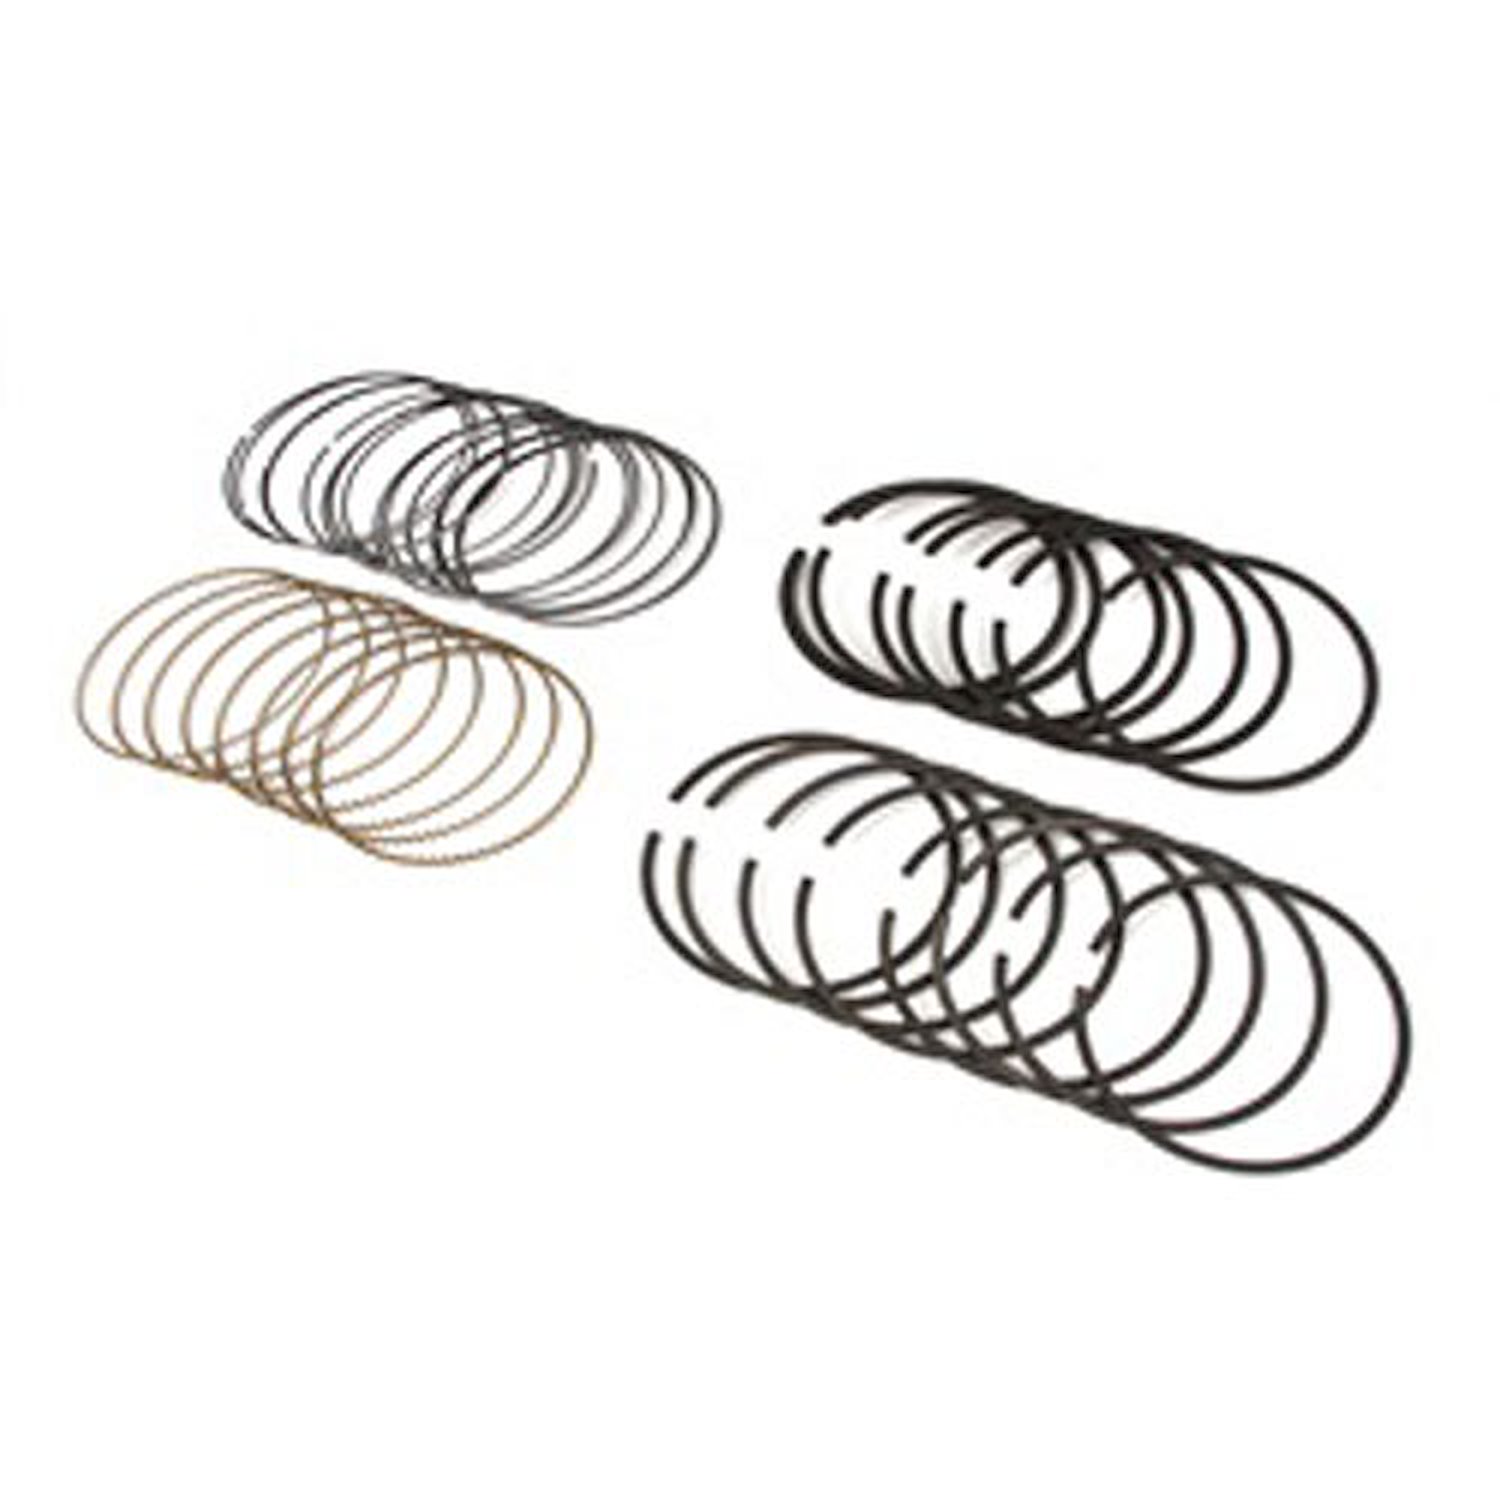 Replacement piston ring set from Omix-ADA, Fits 6.1L engine with a standard bore in 06-10 Jeep Grand Cherokees.